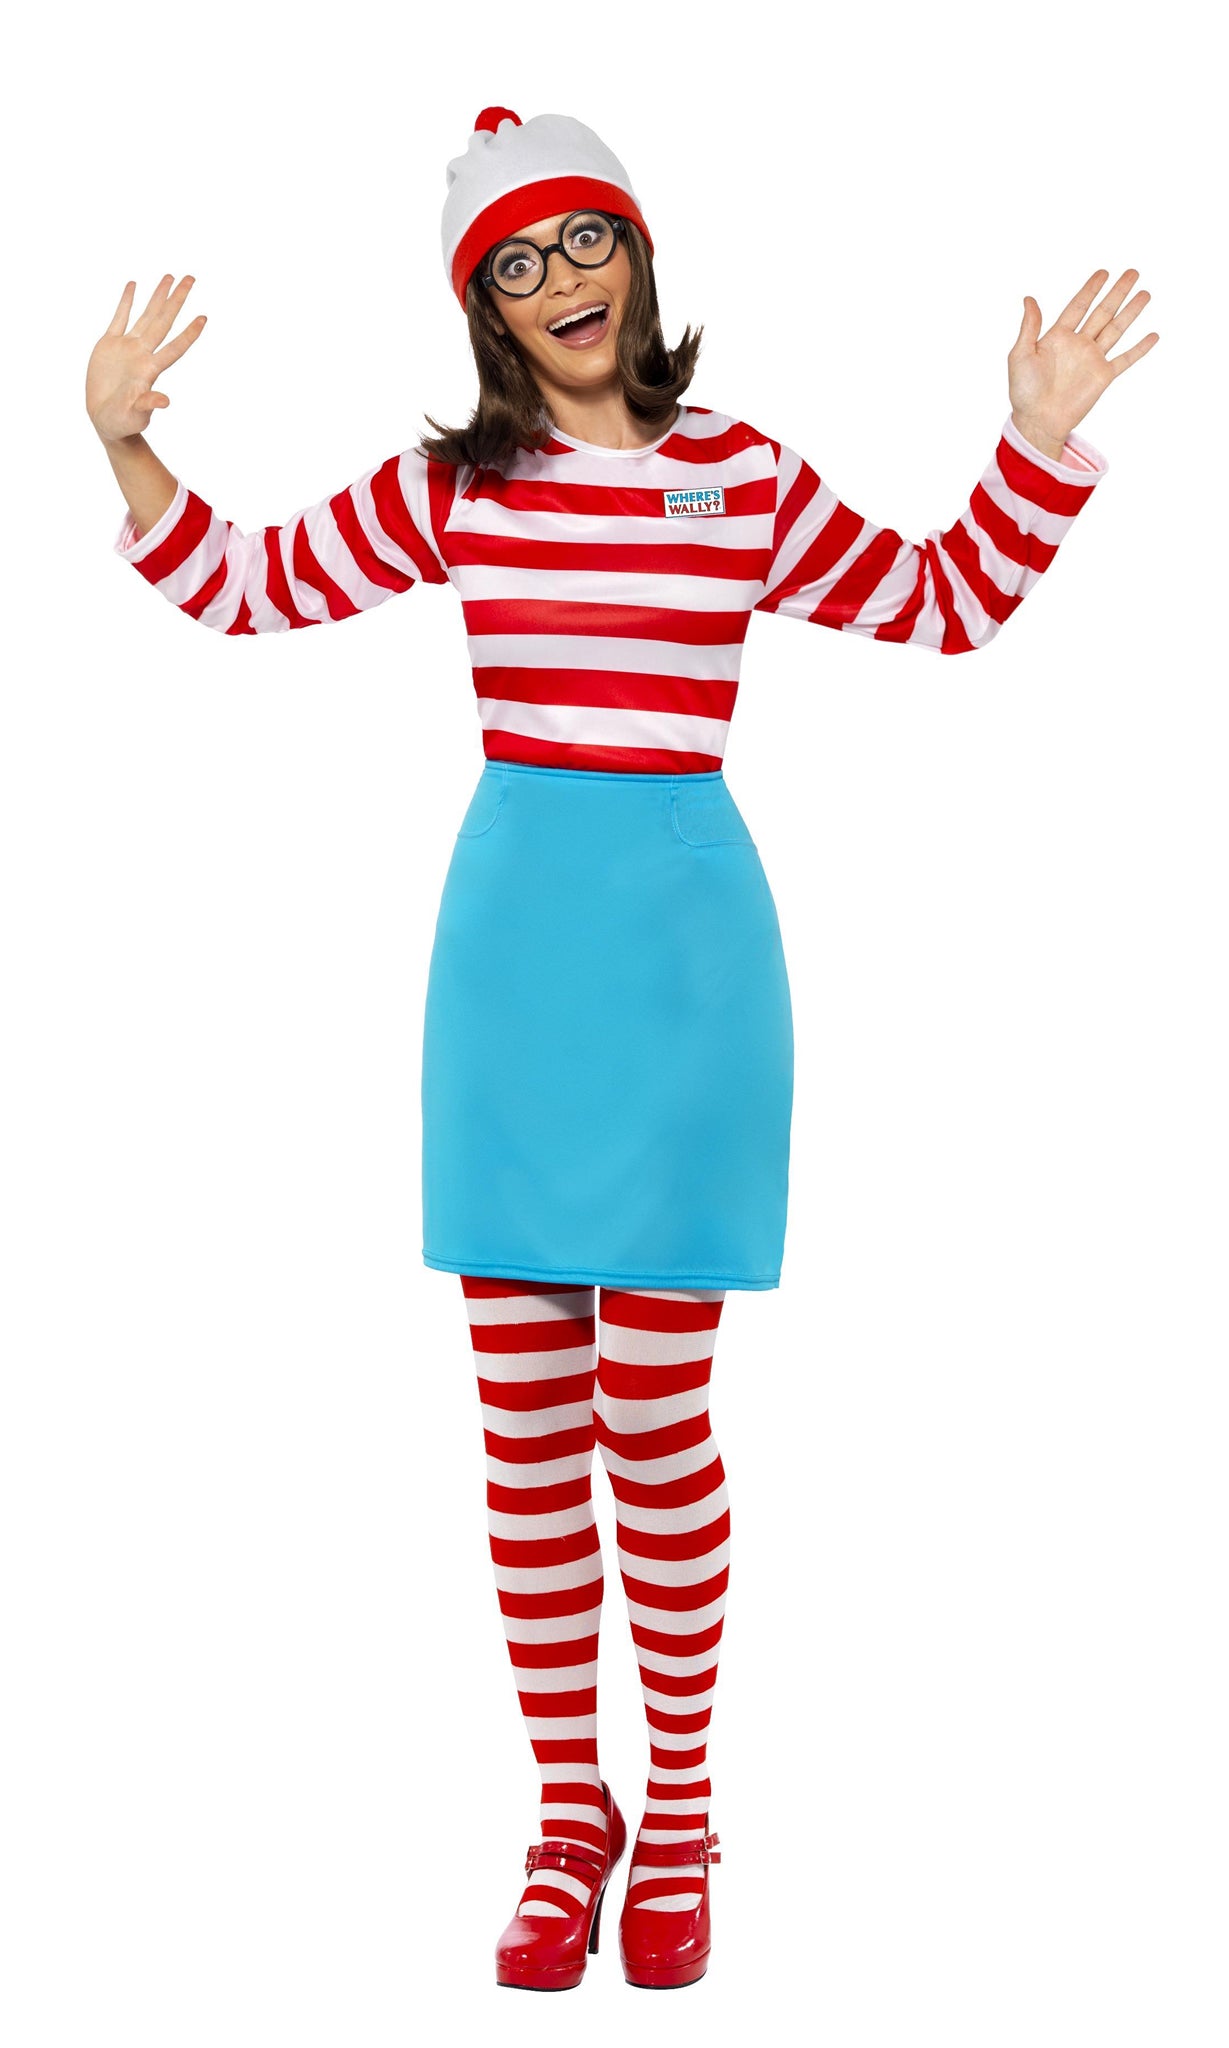 Red and white striped Where's Wenda costume with blue skirt, hat and glasses